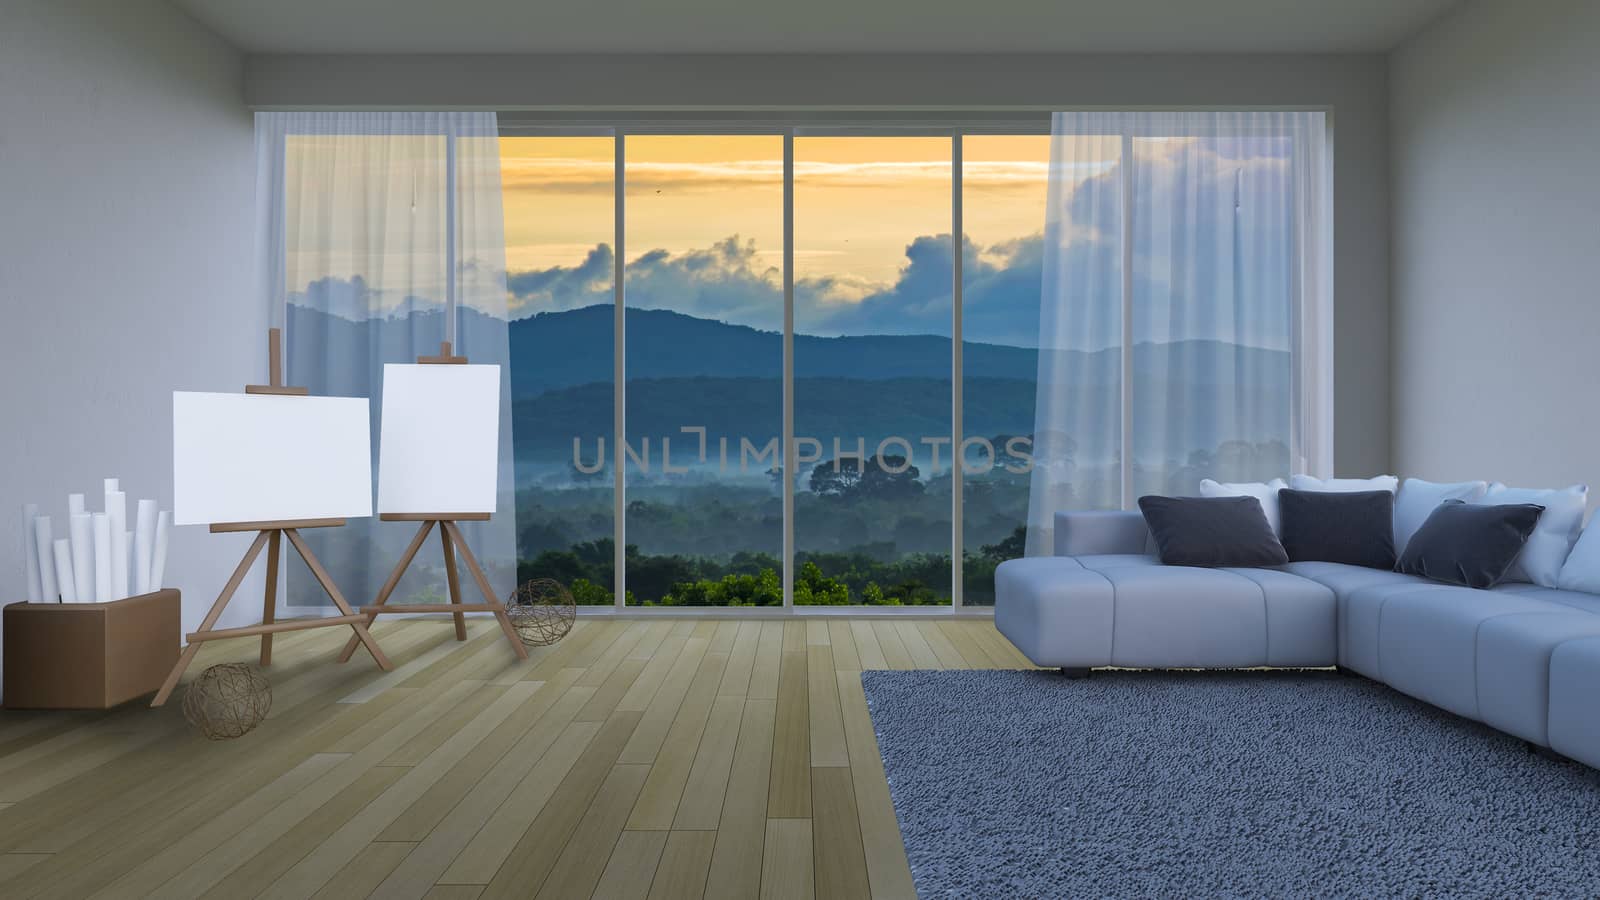 3ds rendering interior living room by Kankliang